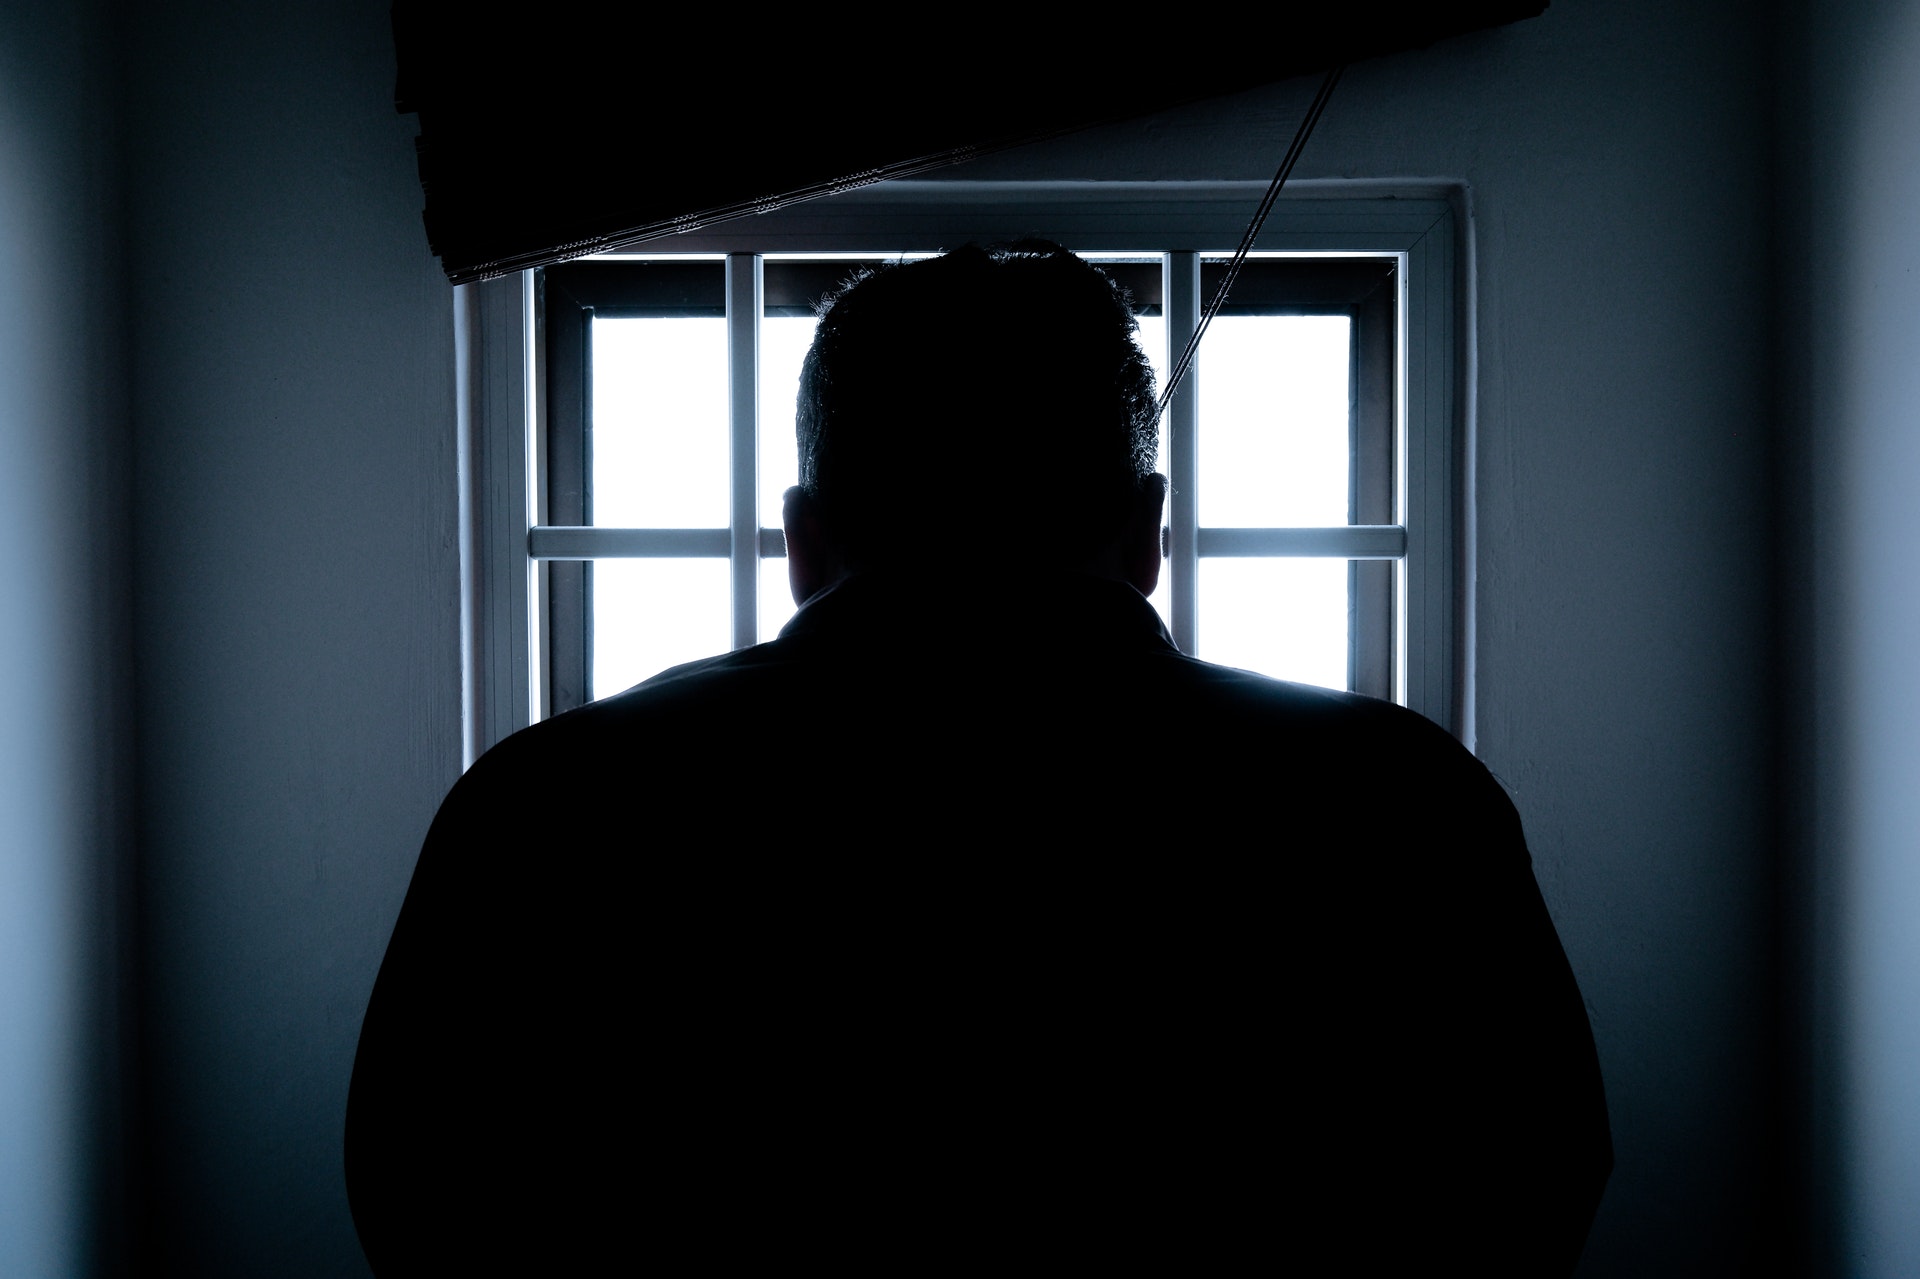 Want to become a prison informant? There are some things you should know first.